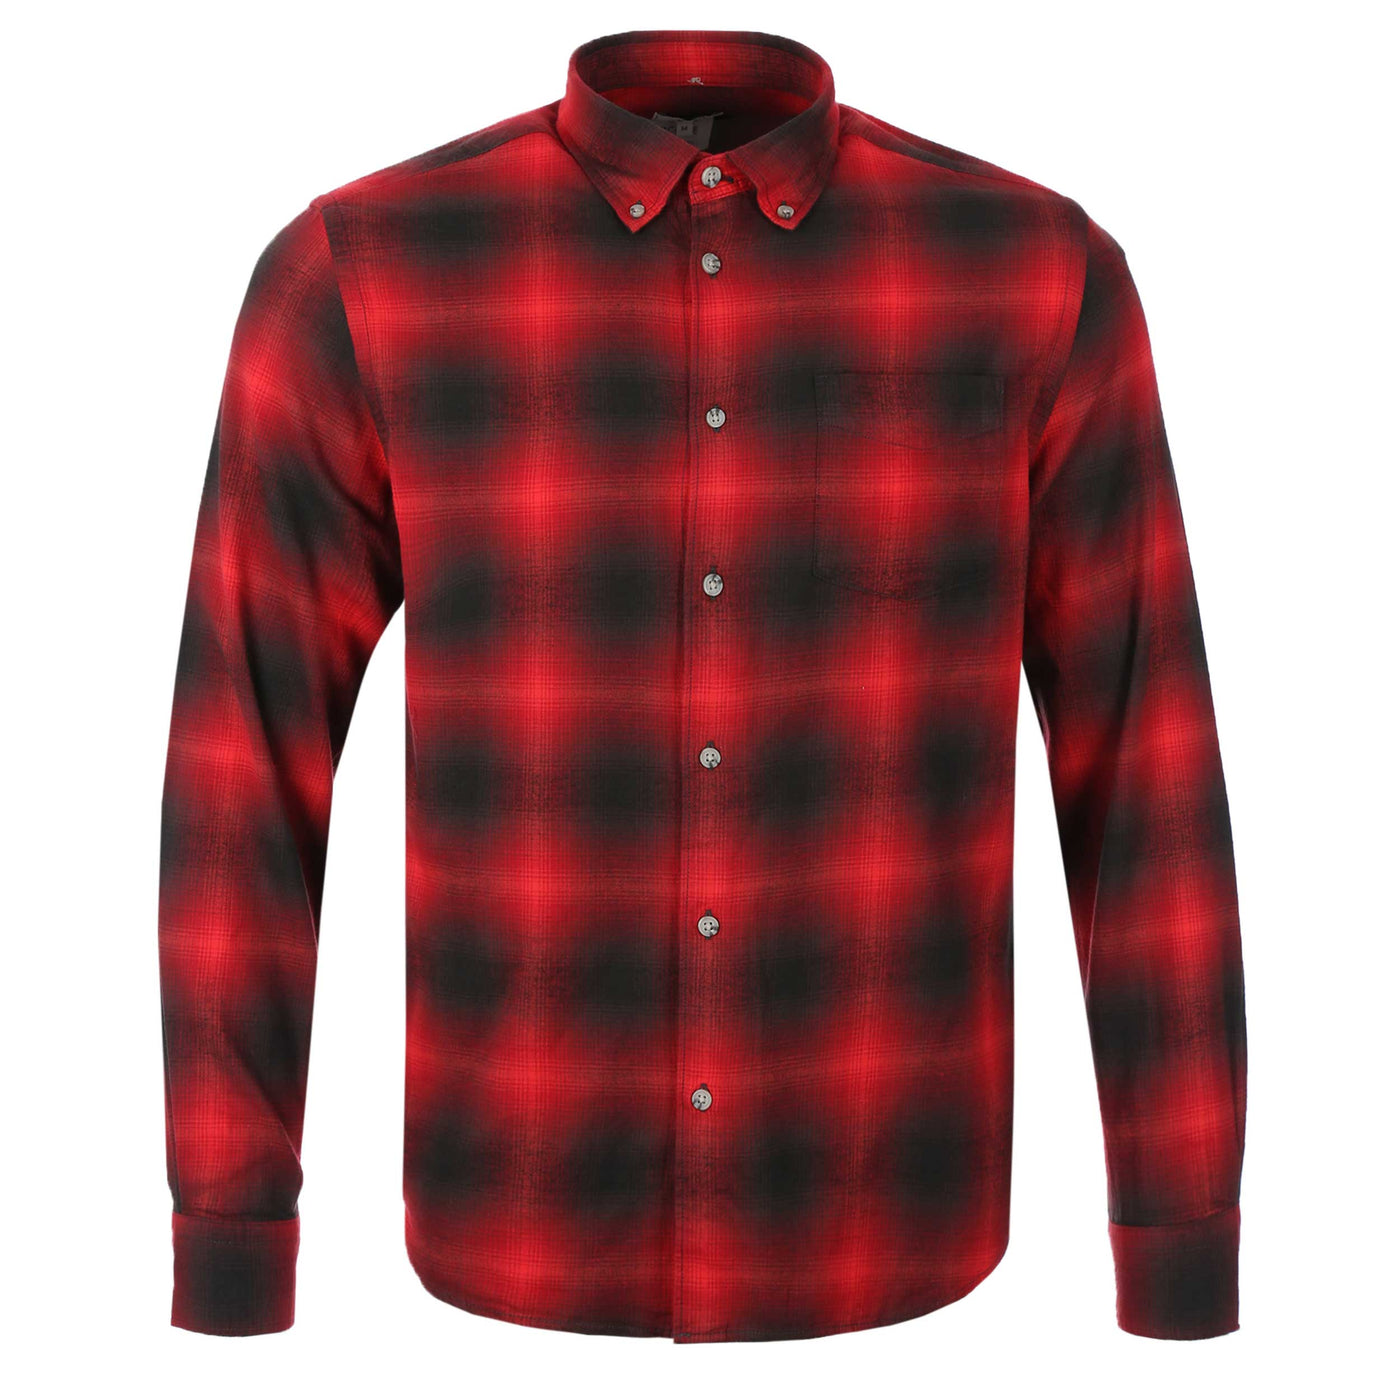 Woolrich Light Flannel Check Shirt in Red Check